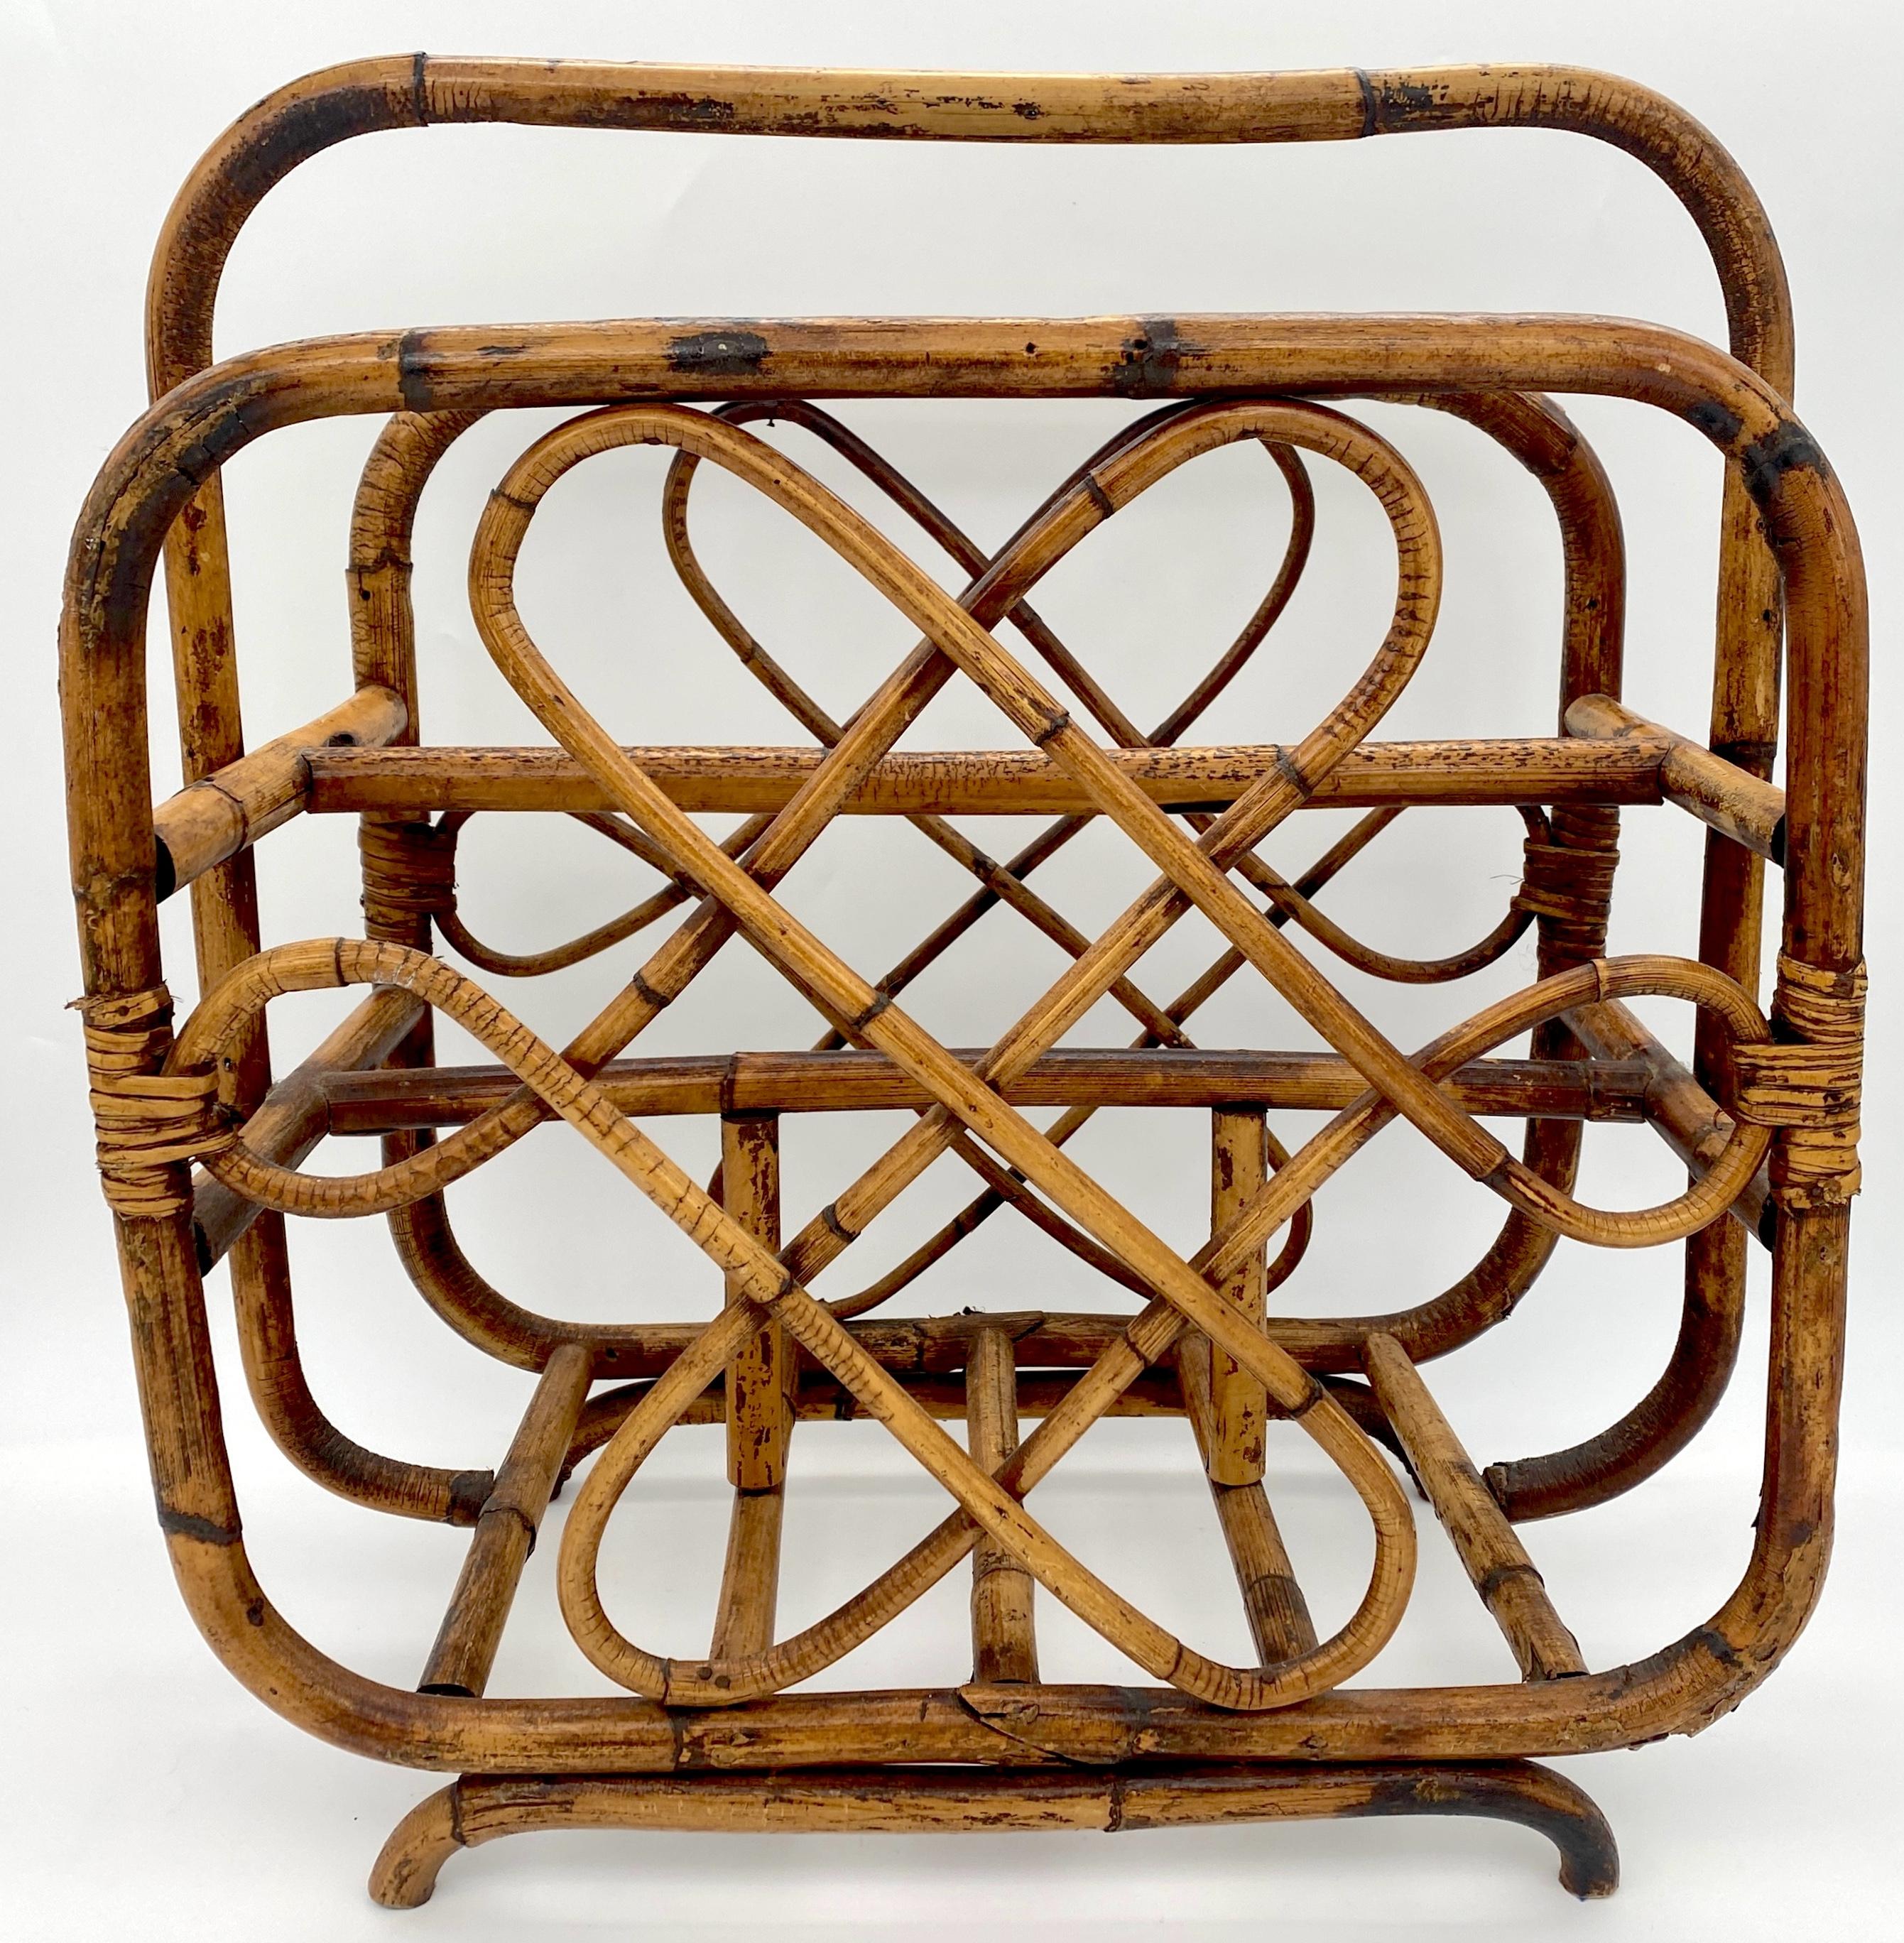 1960s Mod Sculptural Bamboo Magazine Rack/Stand 
USA, circa 1960s 

Add 1960s Mod era charm to your space with this captivating sculptural bamboo magazine rack/stand from the USA, crafted around the 1960s. Standing at 19.5 inches high, 18 inches